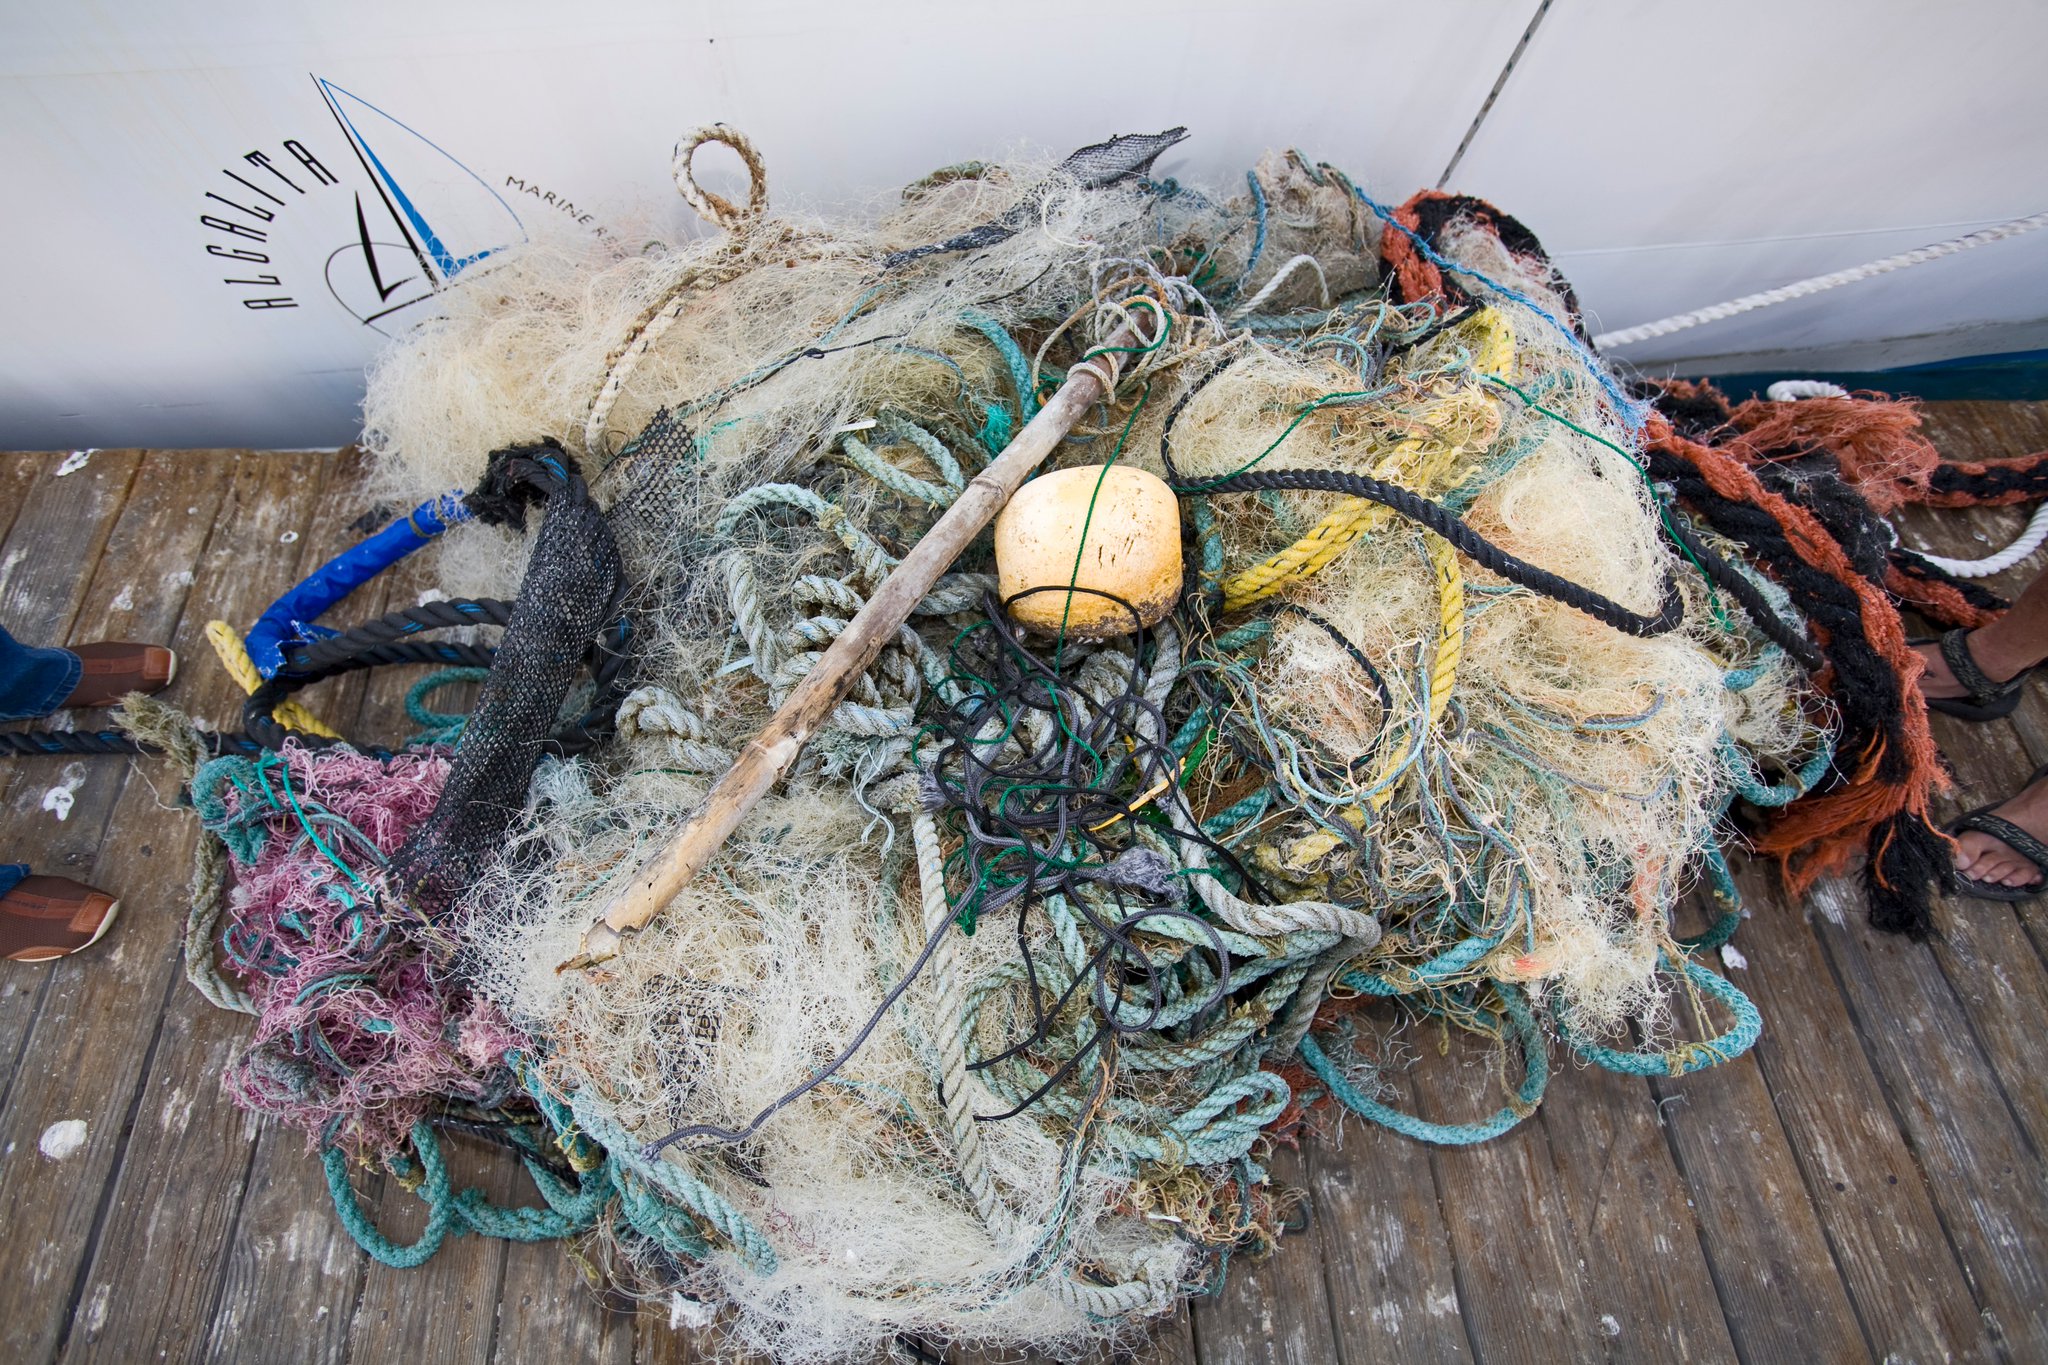 Bloomberg Opinion on X: The main culprit of plastic pollution? Commercial  fishing gear. At least 46 percent of the plastic in the garbage patch comes  from a single product: fishing nets